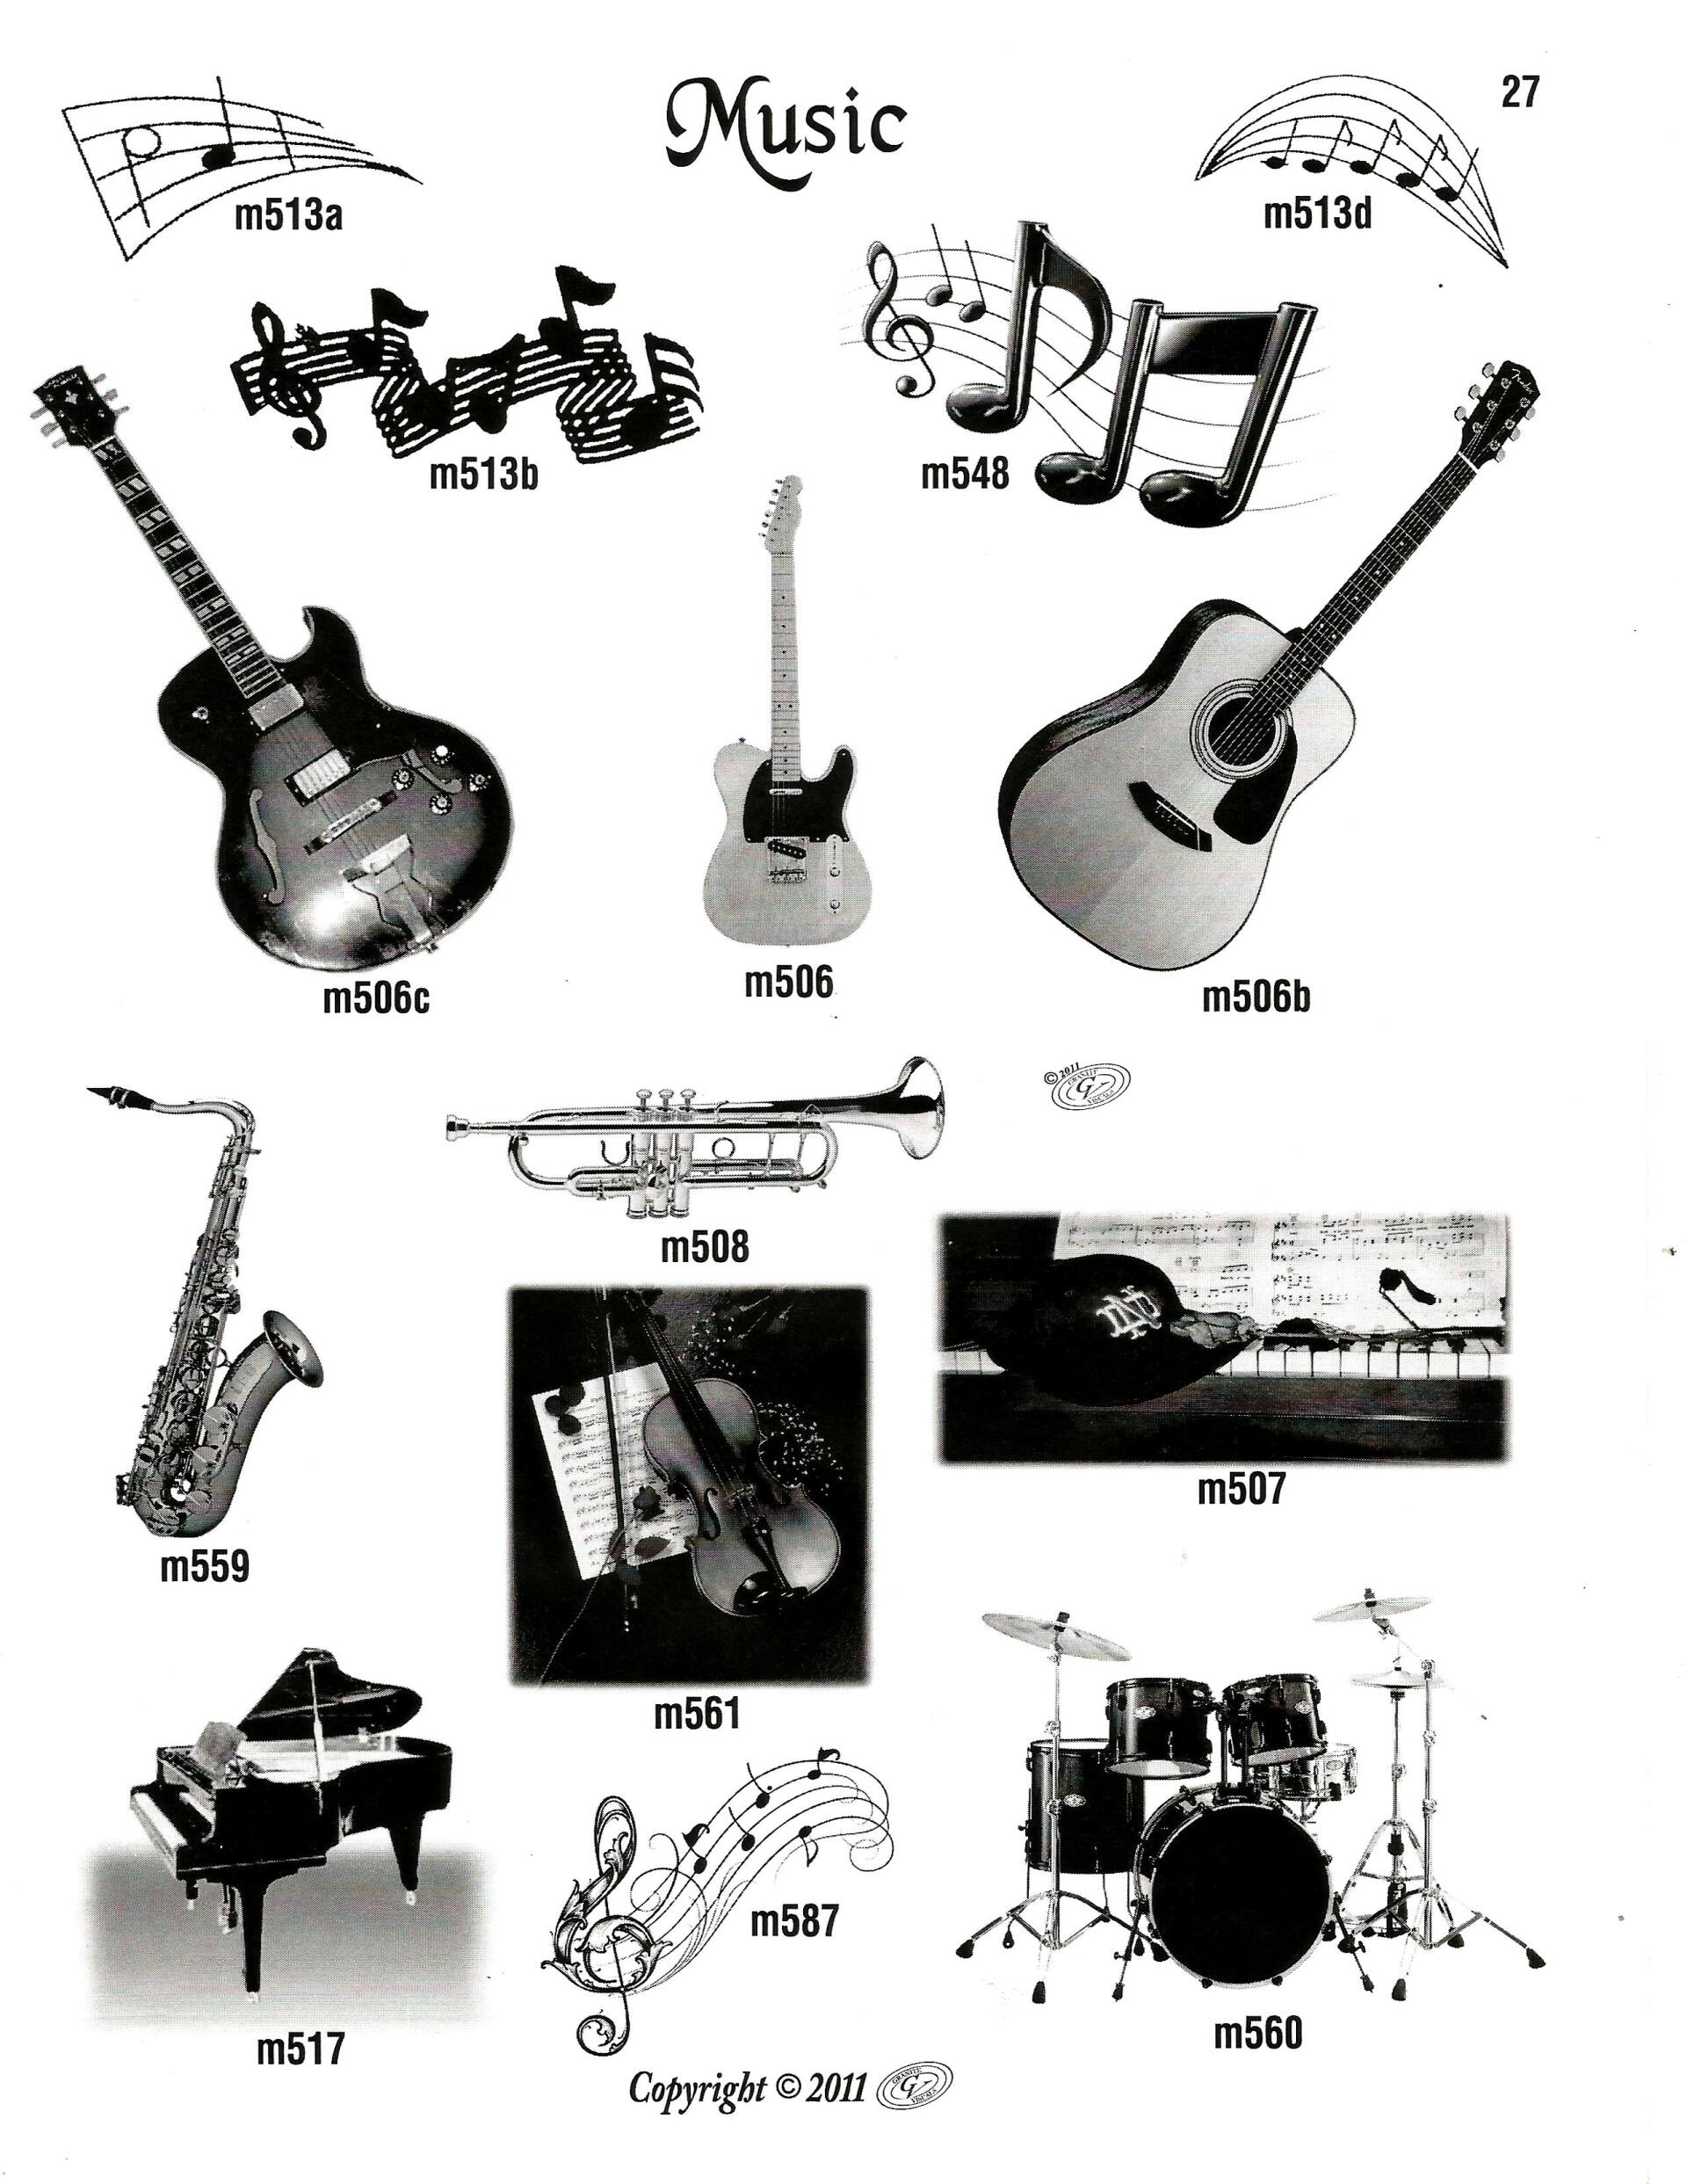 there are many different types of musical instruments in this picture .